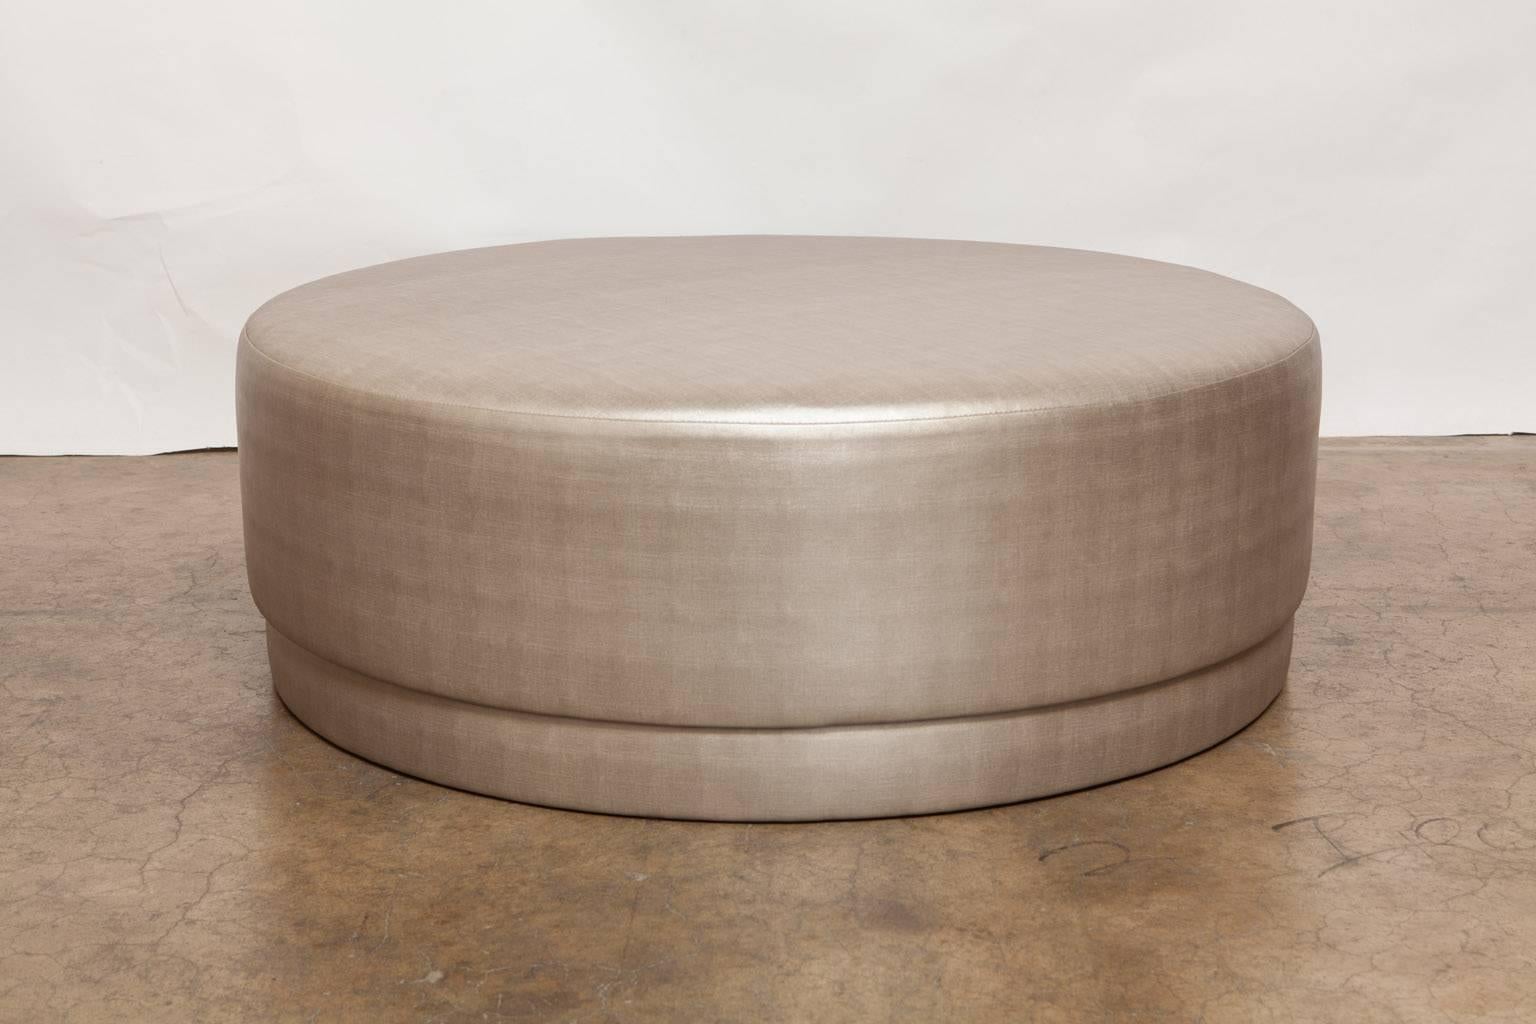 Chic pair of matching round ottomans newly upholstered in a rich textured metallic silver/gold fabric with a gorgeous lustre and feel. Large and generous for casual seating. Pill shaped with padded top and sides.